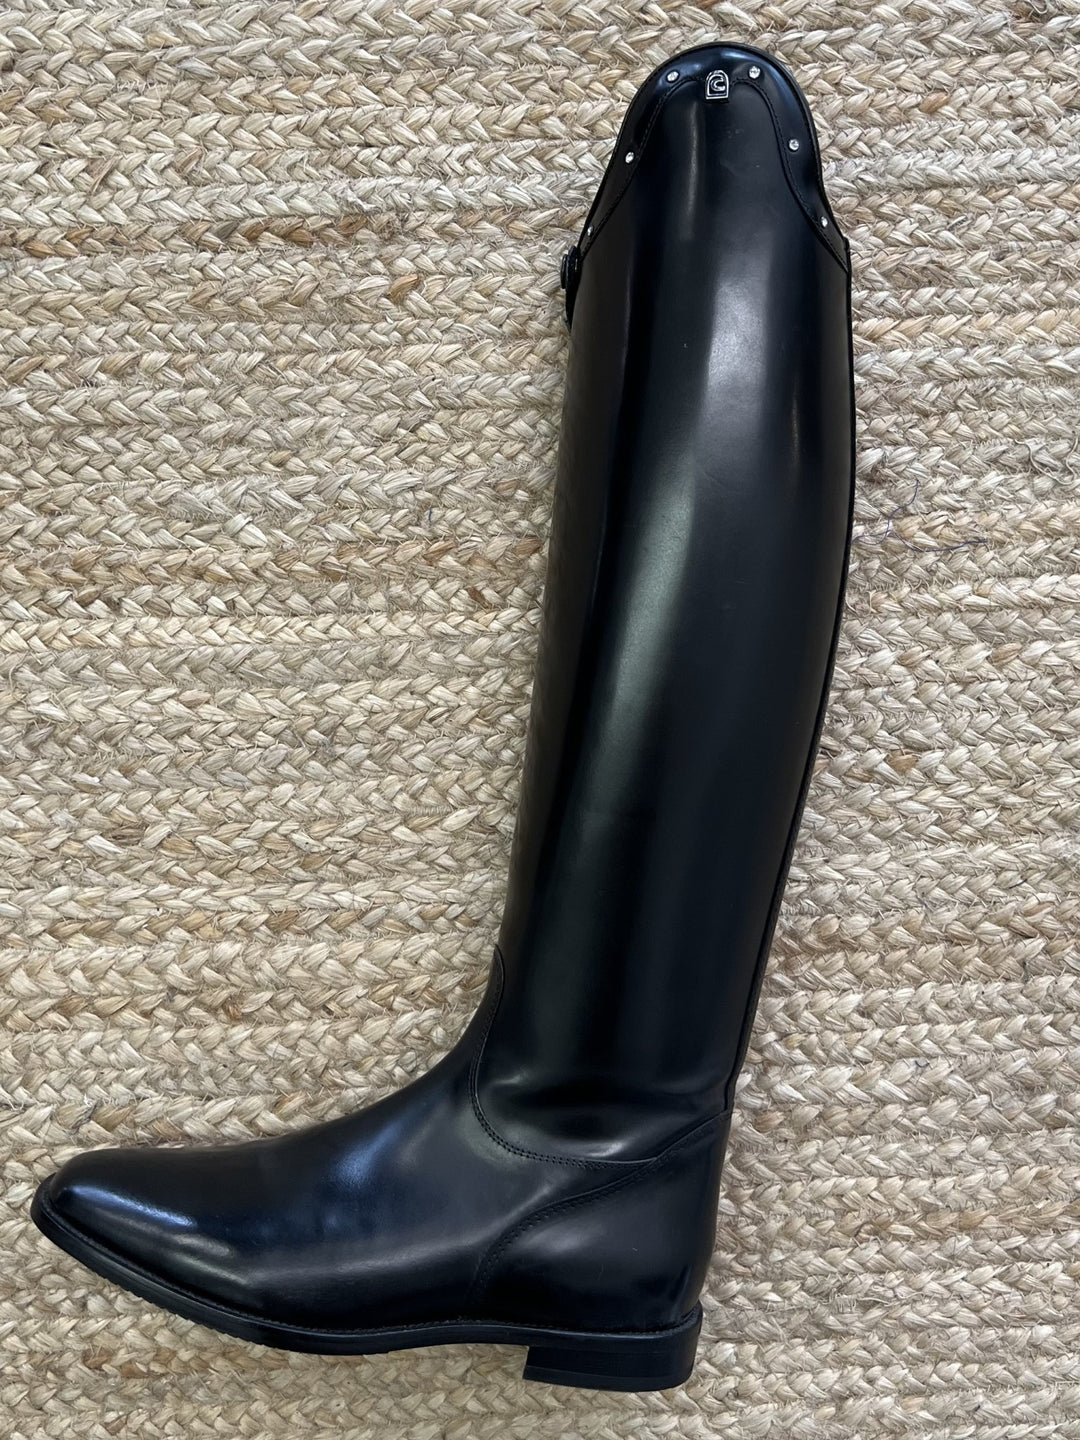 INSIGNIS LUX DRESSAGE BOOTS 6.5 34/48